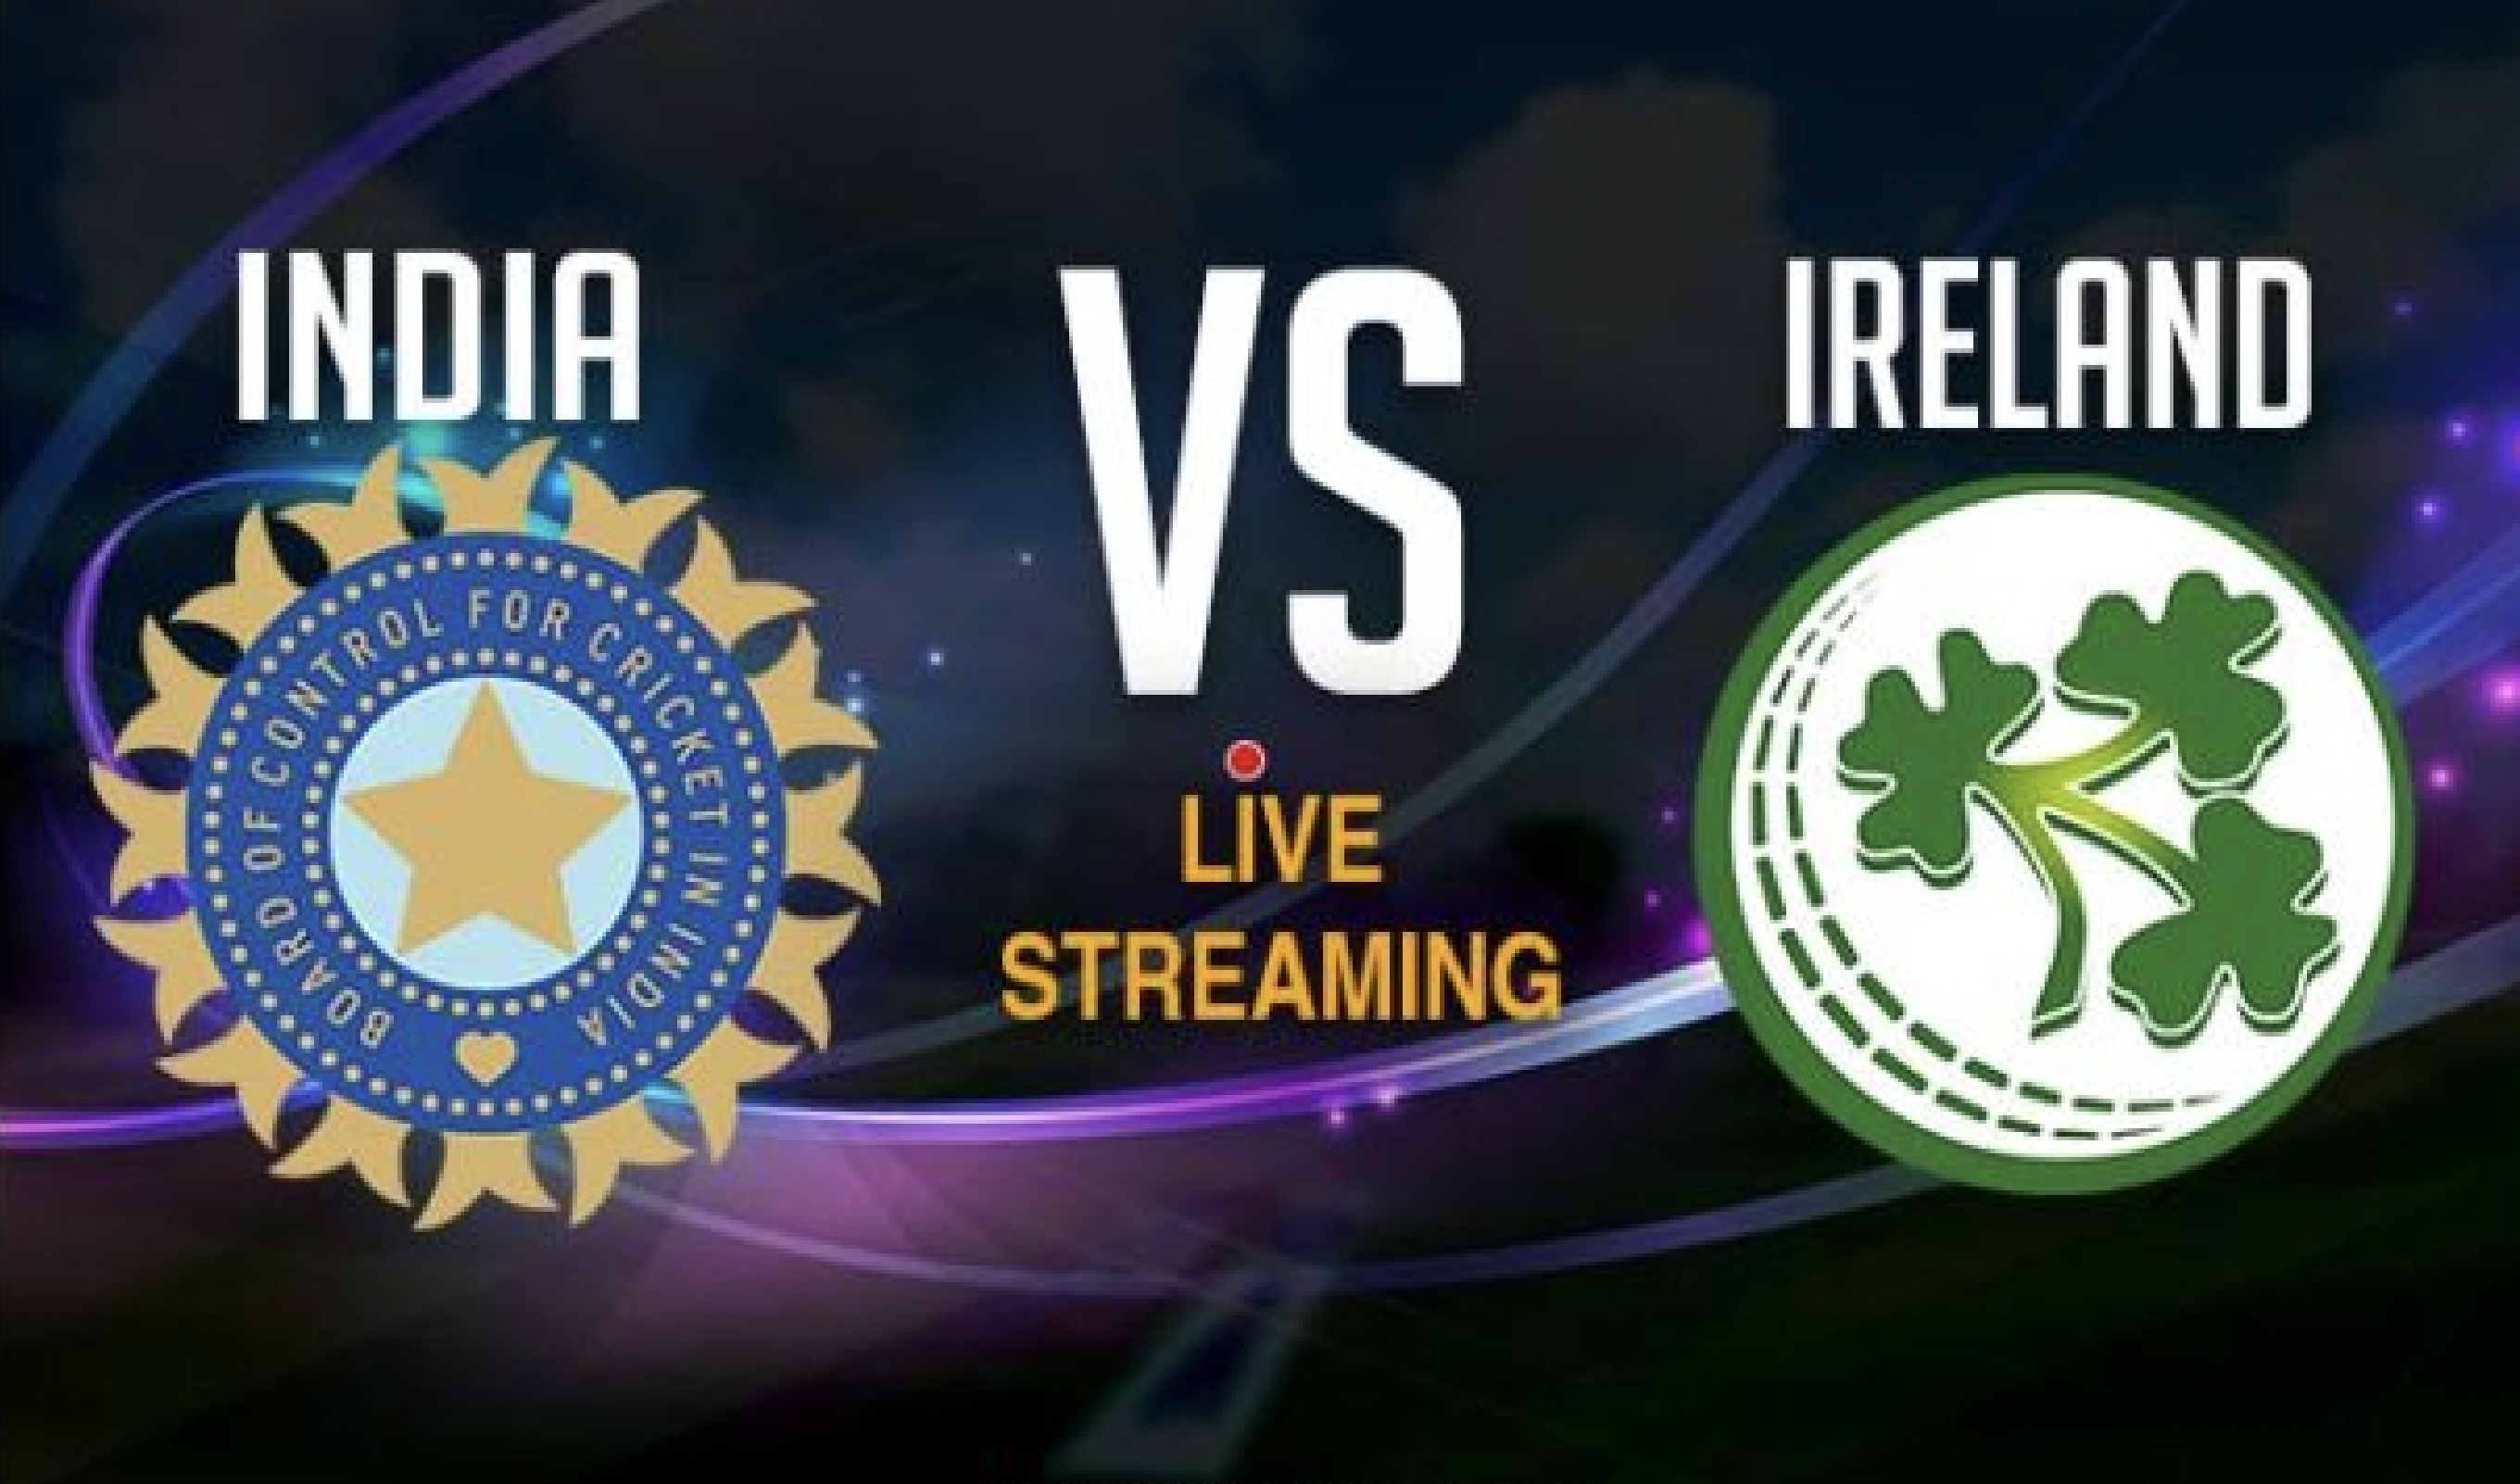 IND vs IRE LIVE Streaming: India win by 7 wickets, SonyLIV to stream India vs Ireland in MULTIPLE Languages: INDIA IRELAND T20 Series LIVE